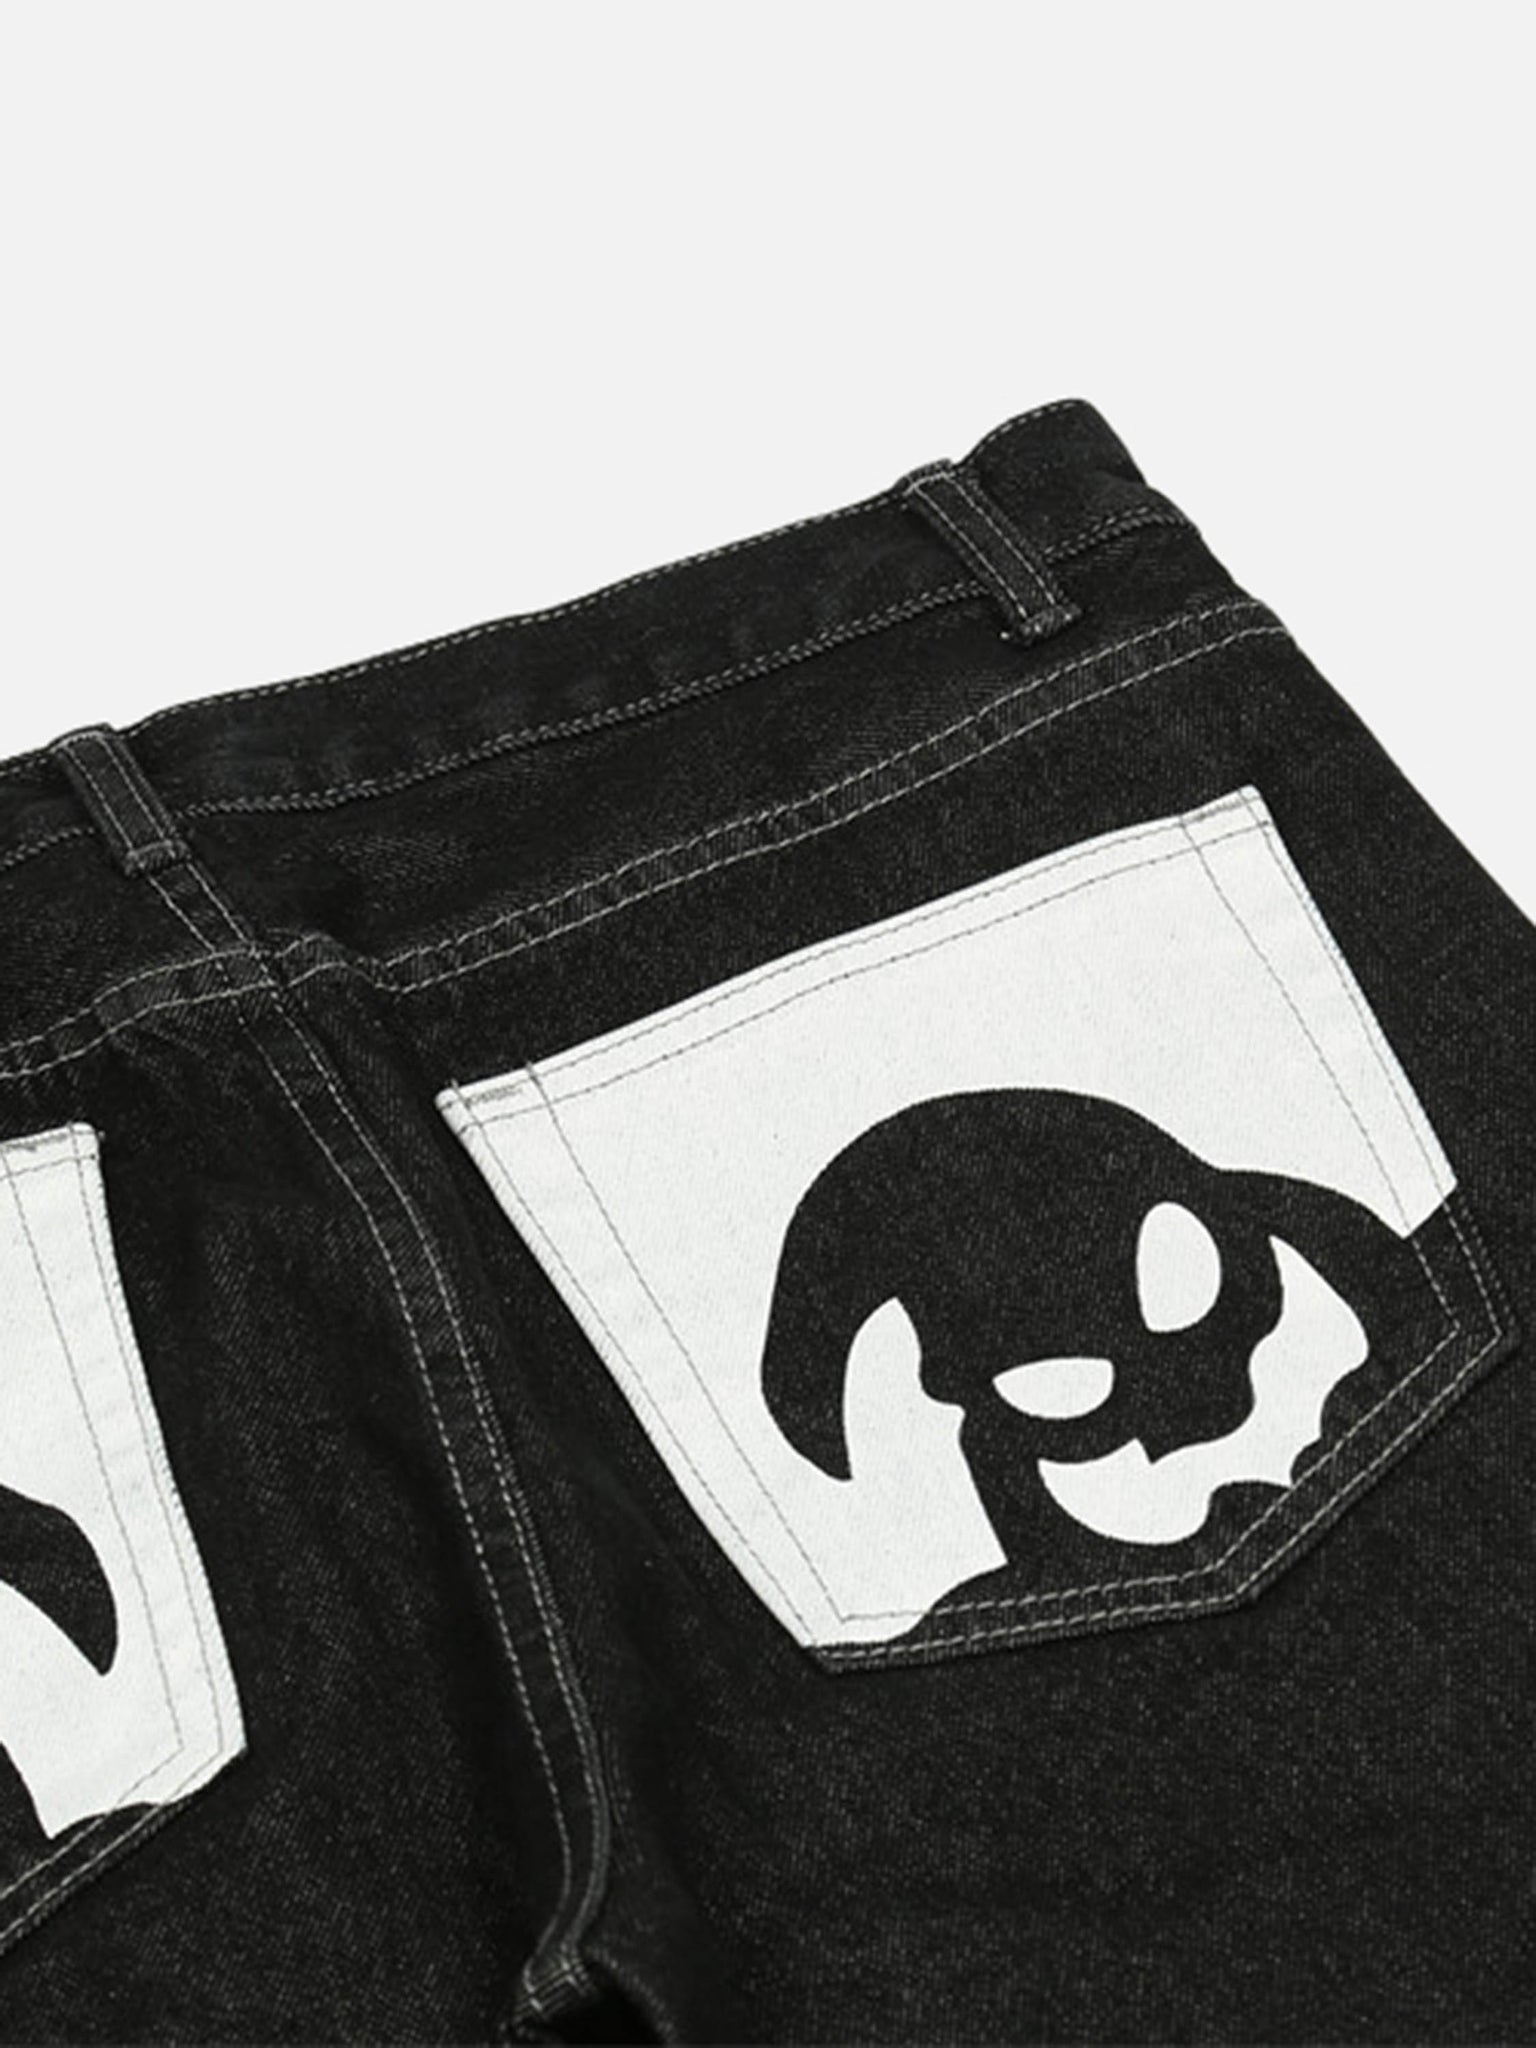 The Supermade Cartoon Pocket Print Washed Jeans